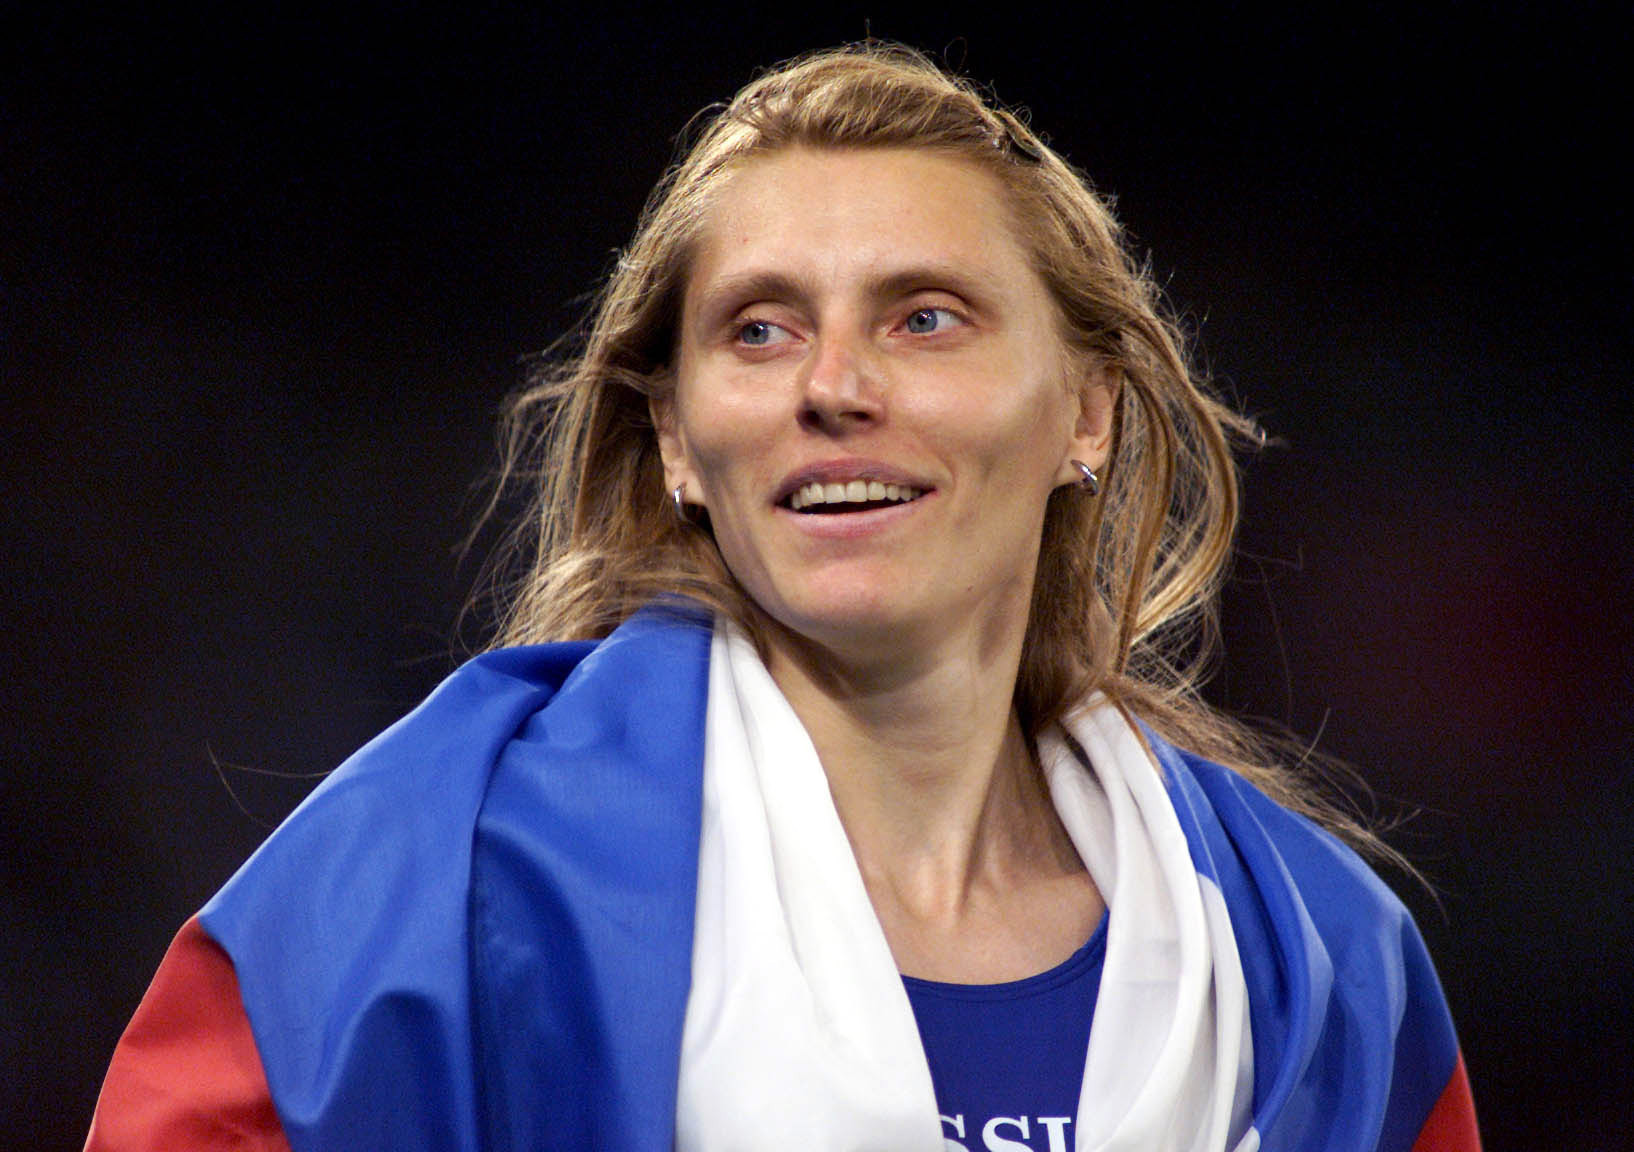 Russian Athletics Federation "a small step away" from reinstatement, Privalova claims